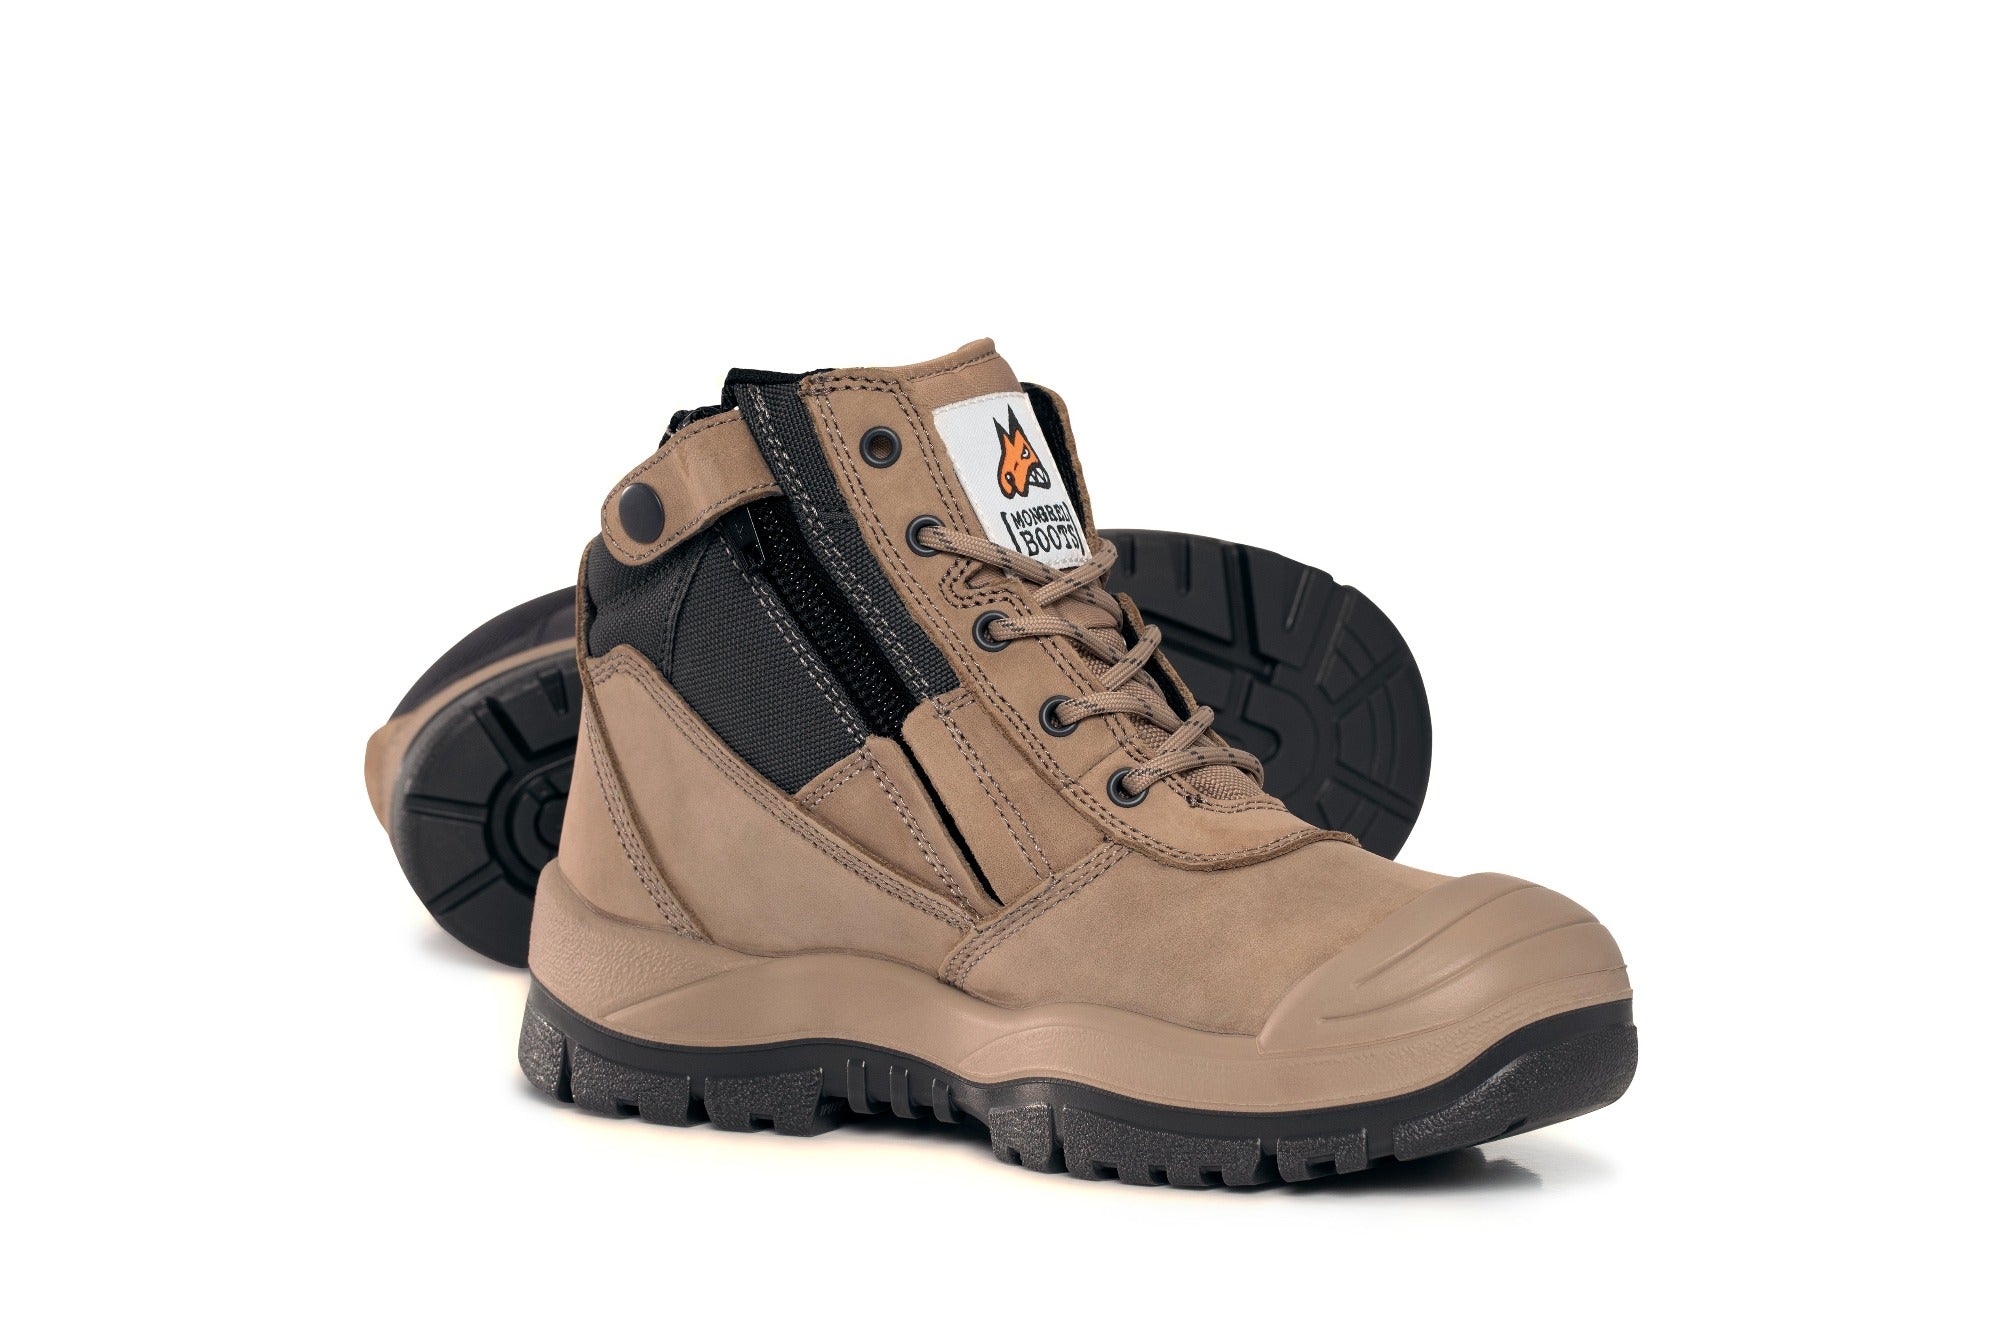 Mongrel ZipSider Boot with Scuff Cap - Stone 461060